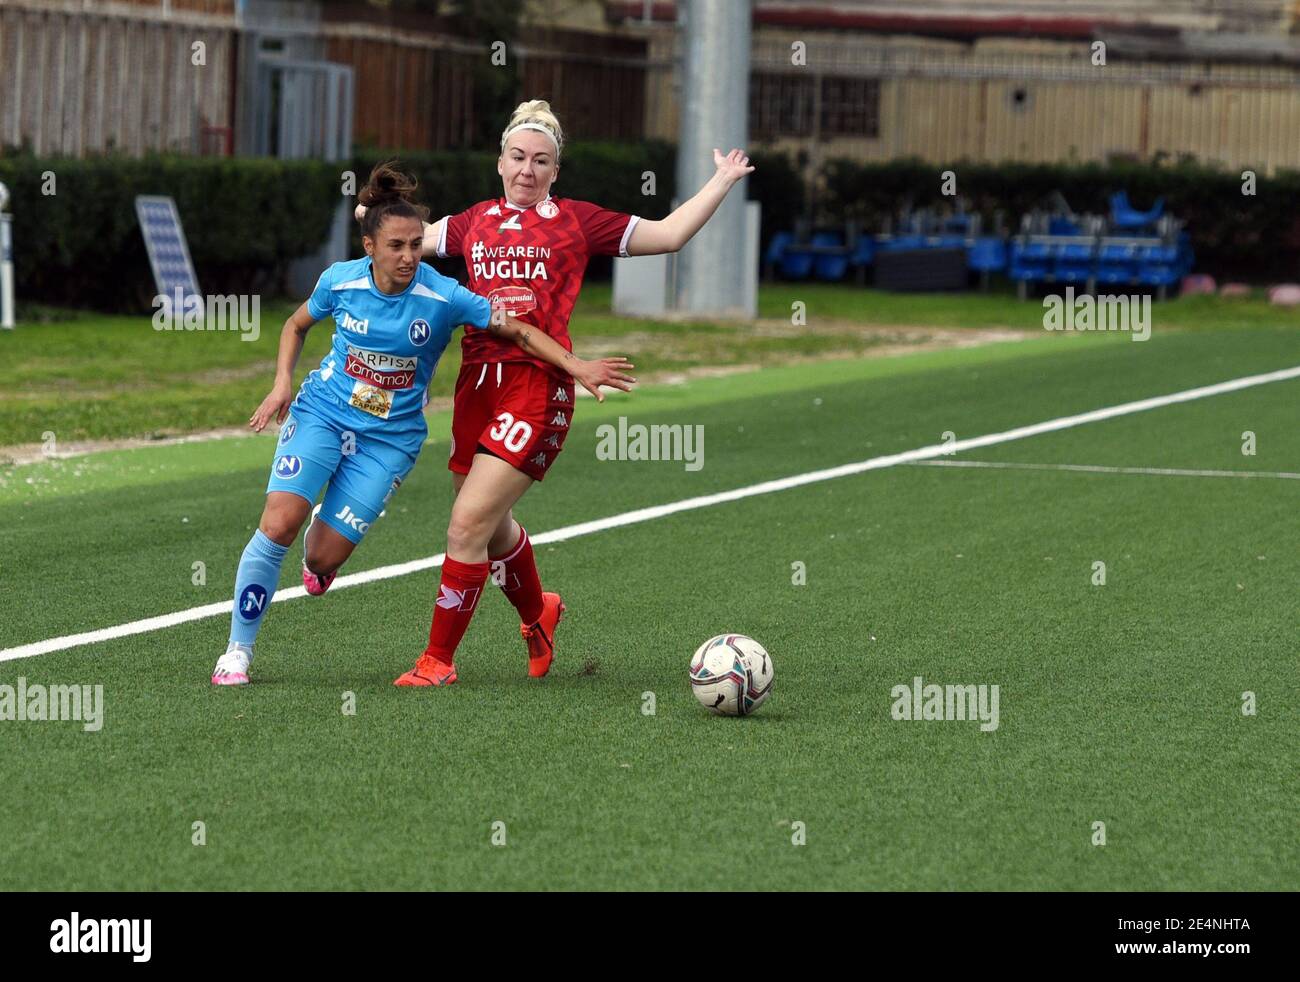 Italy. 23rd Jan, 2021. Elisabetta Oliviero in action during in the match of Serie A Female, the Italian Woman League Football at “Caduti di Brema” stadium of Naples, on the field Napoli vs Bari, Napoli won the match 1-0. (Photo by Pasquale Gargano/Pacific Press/Sipa USA) Credit: Sipa USA/Alamy Live News Stock Photo